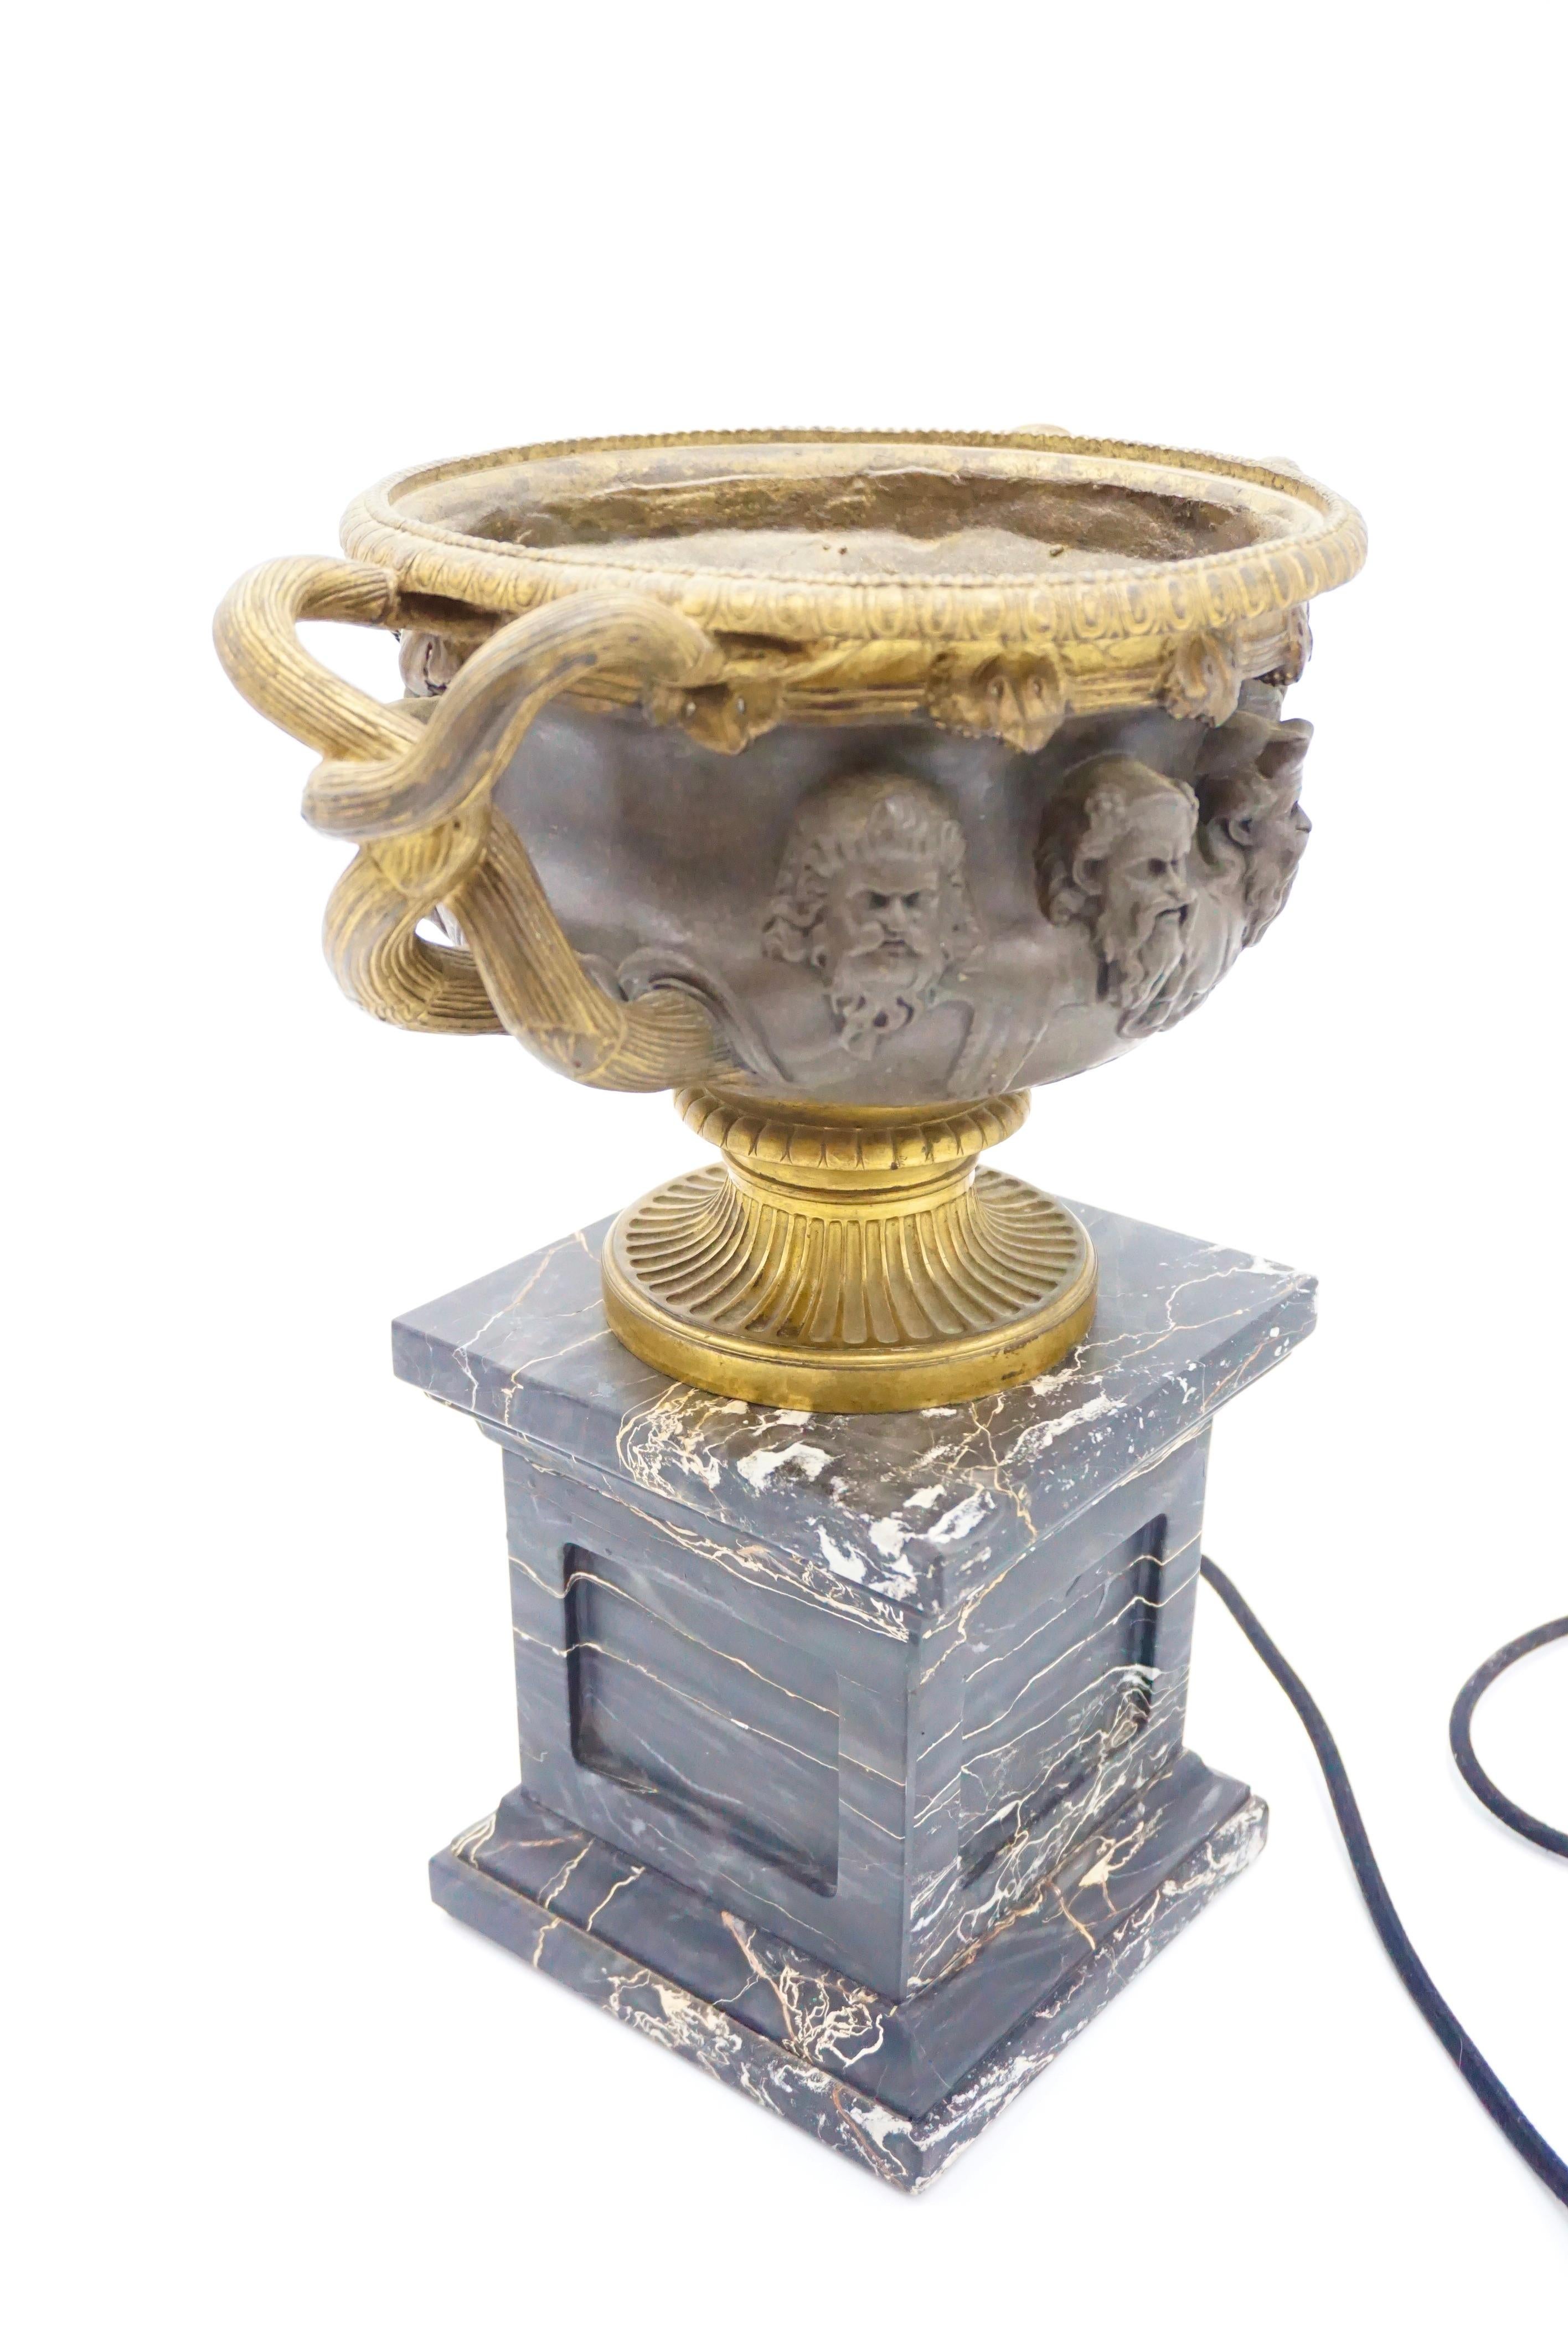 Bronze and Gilt Warwick Vase Lamp on Portoro Marble Basis, by Barbadienne, 1860 For Sale 5